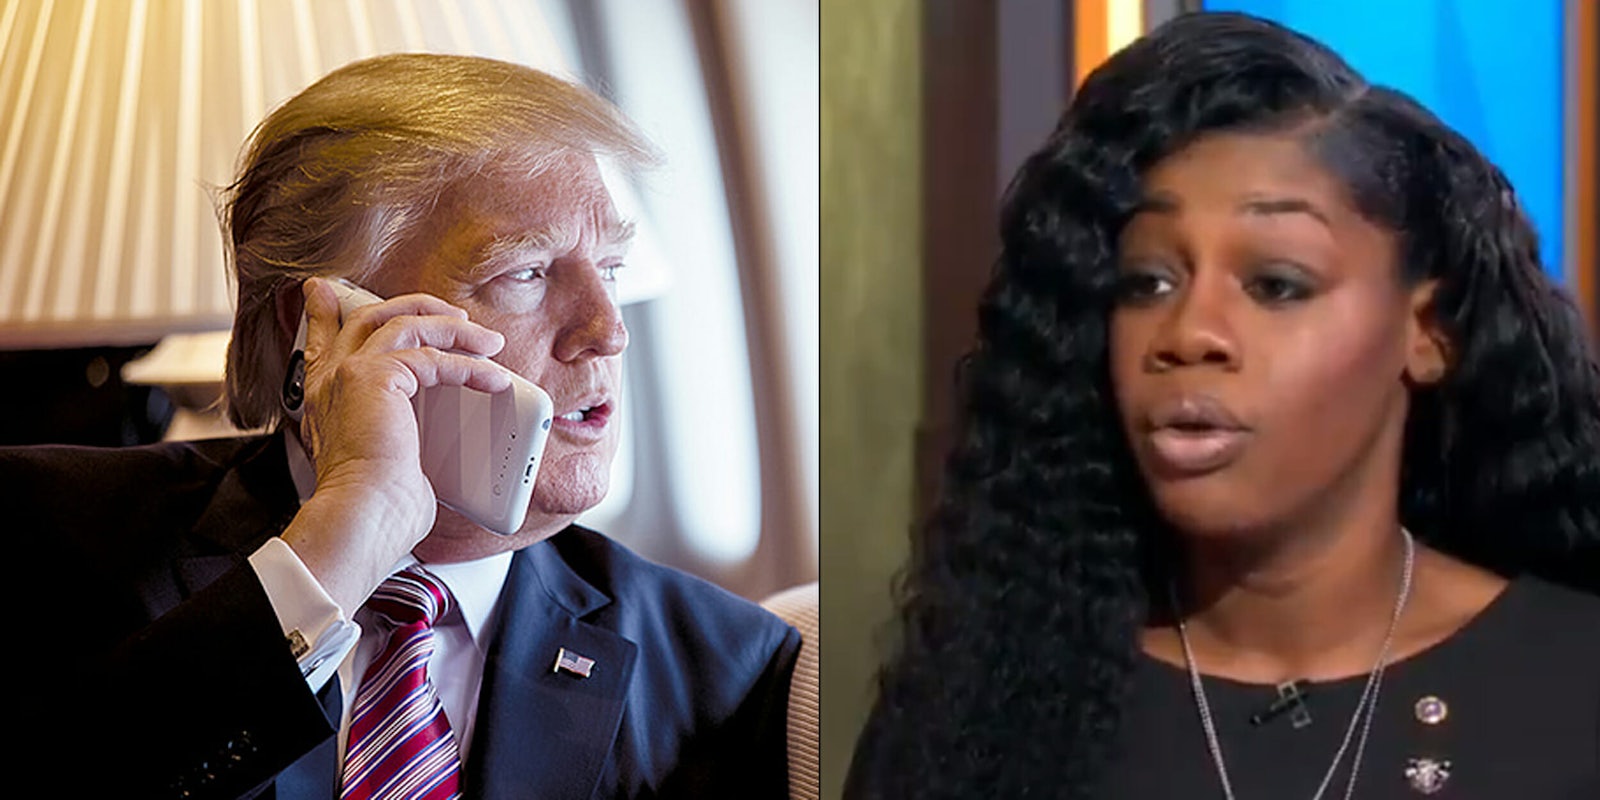 Myeshia Johnson, the widow of Sgt. La David T. Johnson, said claims that Donald Trump told her that her husband 'knew what he signed up for' were '100 percent correct' during an interview with Good Morning America.